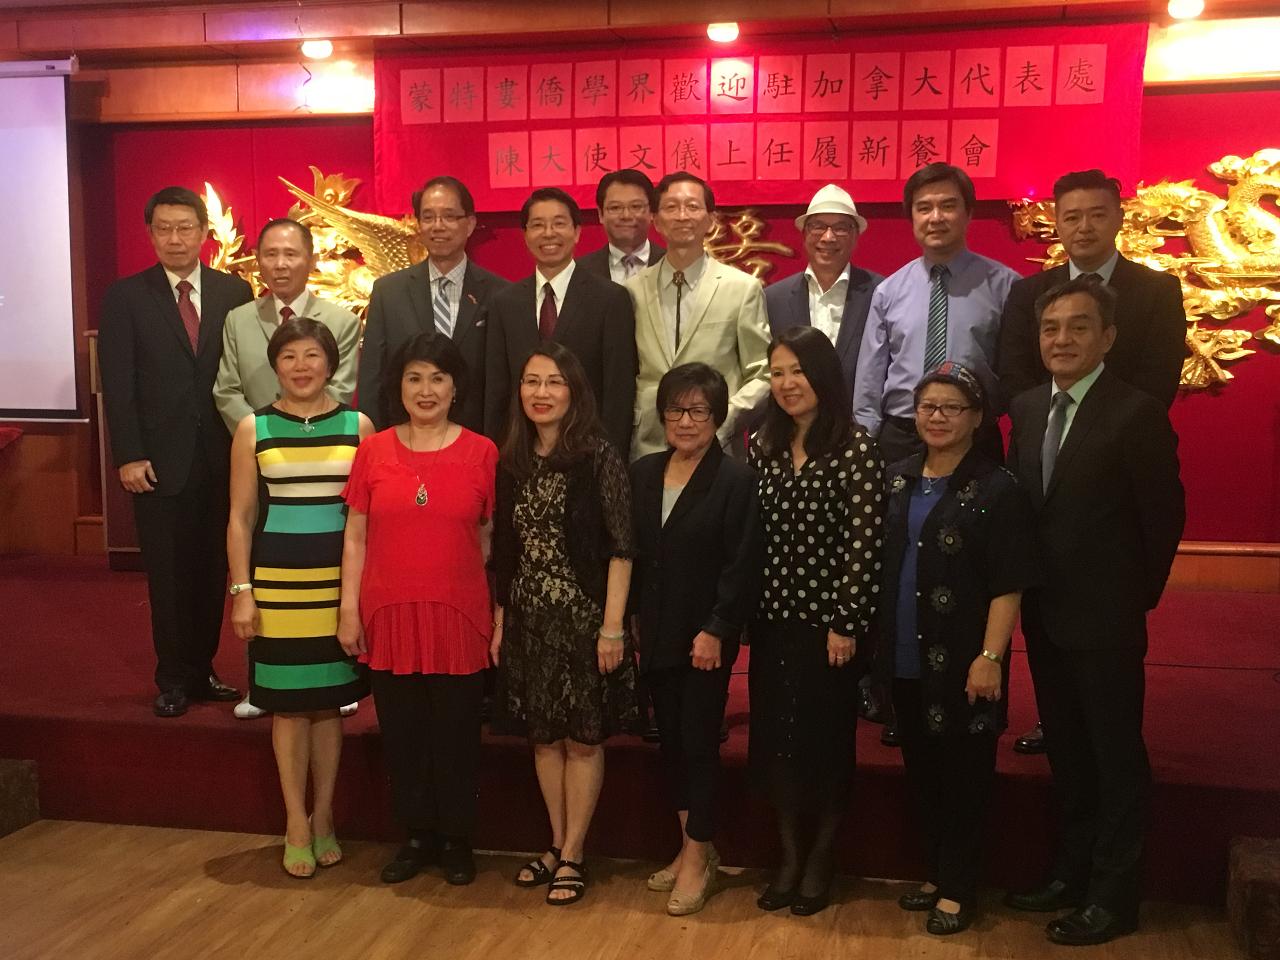 Representative Winston Wen-yi Chen of the Taipei Economic and Cultural Office in Canada (TECO) was warmly welcomed by the overseas Chinese and Taiwanese communities in Montreal on July 8, 2018     1/5